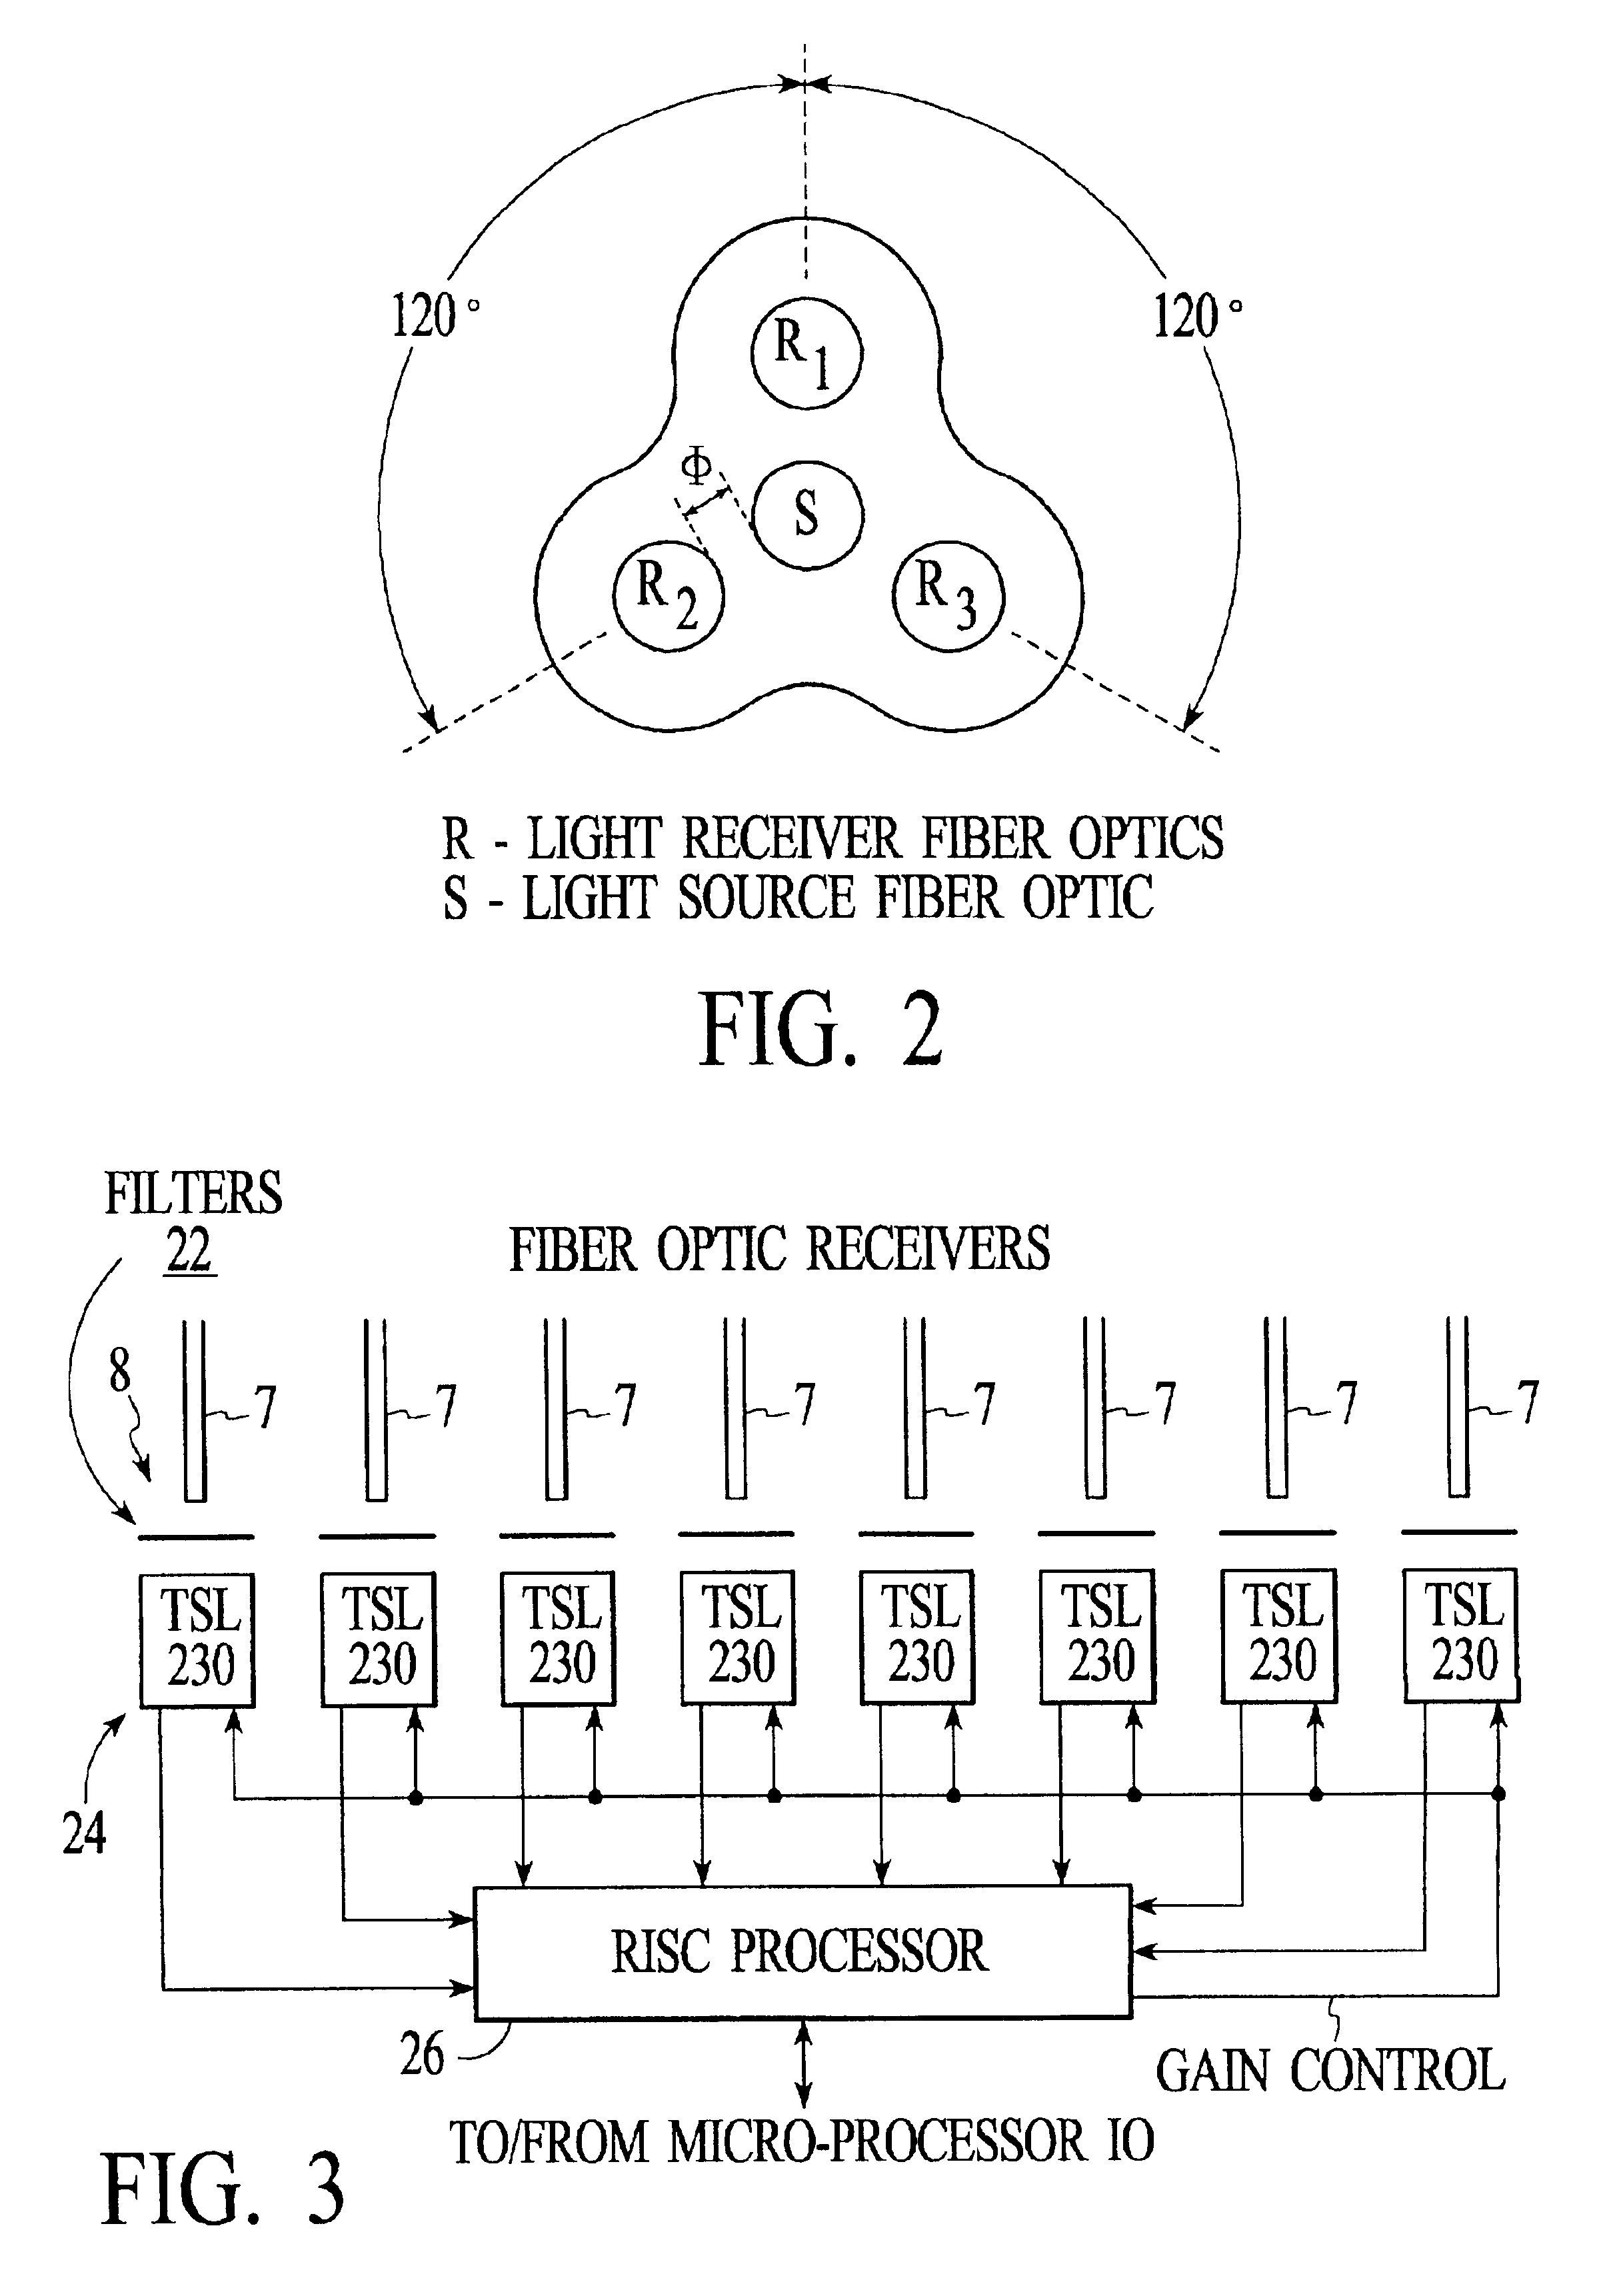 Apparatus for determining multi-bit data via light received by a light receiver and coupled to spectral sensors that measure light in spectral bands